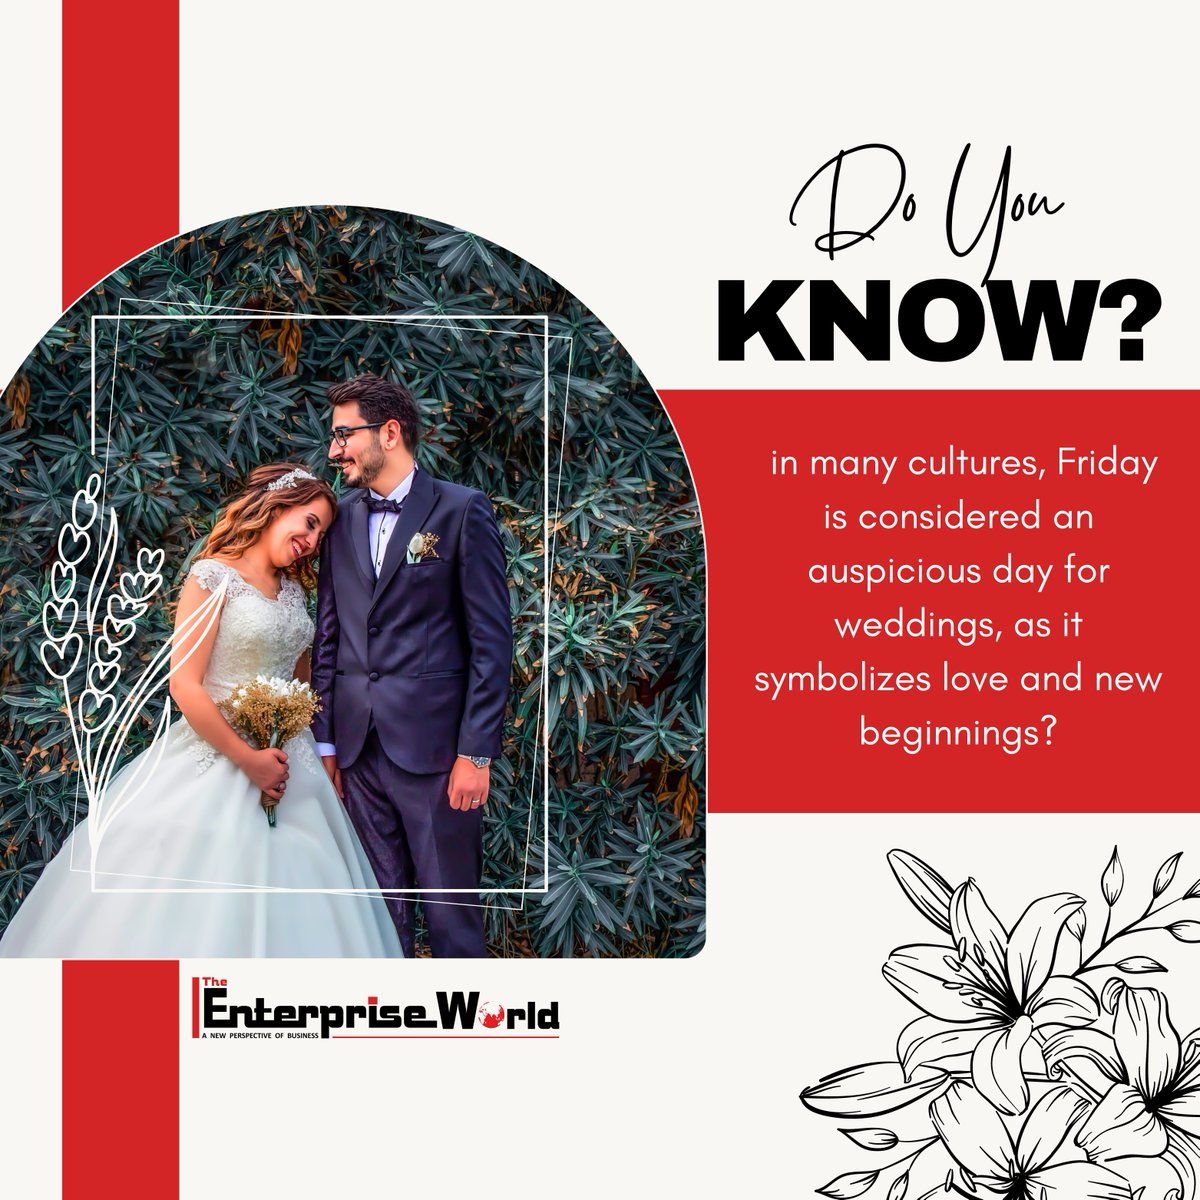 When Friday is coming there is a vibe of the weekend. We hope you liked reading about a fun fact regarding Friday. #FridayFeeling #FunFactFriday #WeekendVibes #FridayFacts #LoveAndBeginnings #WeekendCountdown #FriyayFeels #LoveIsInTheAir